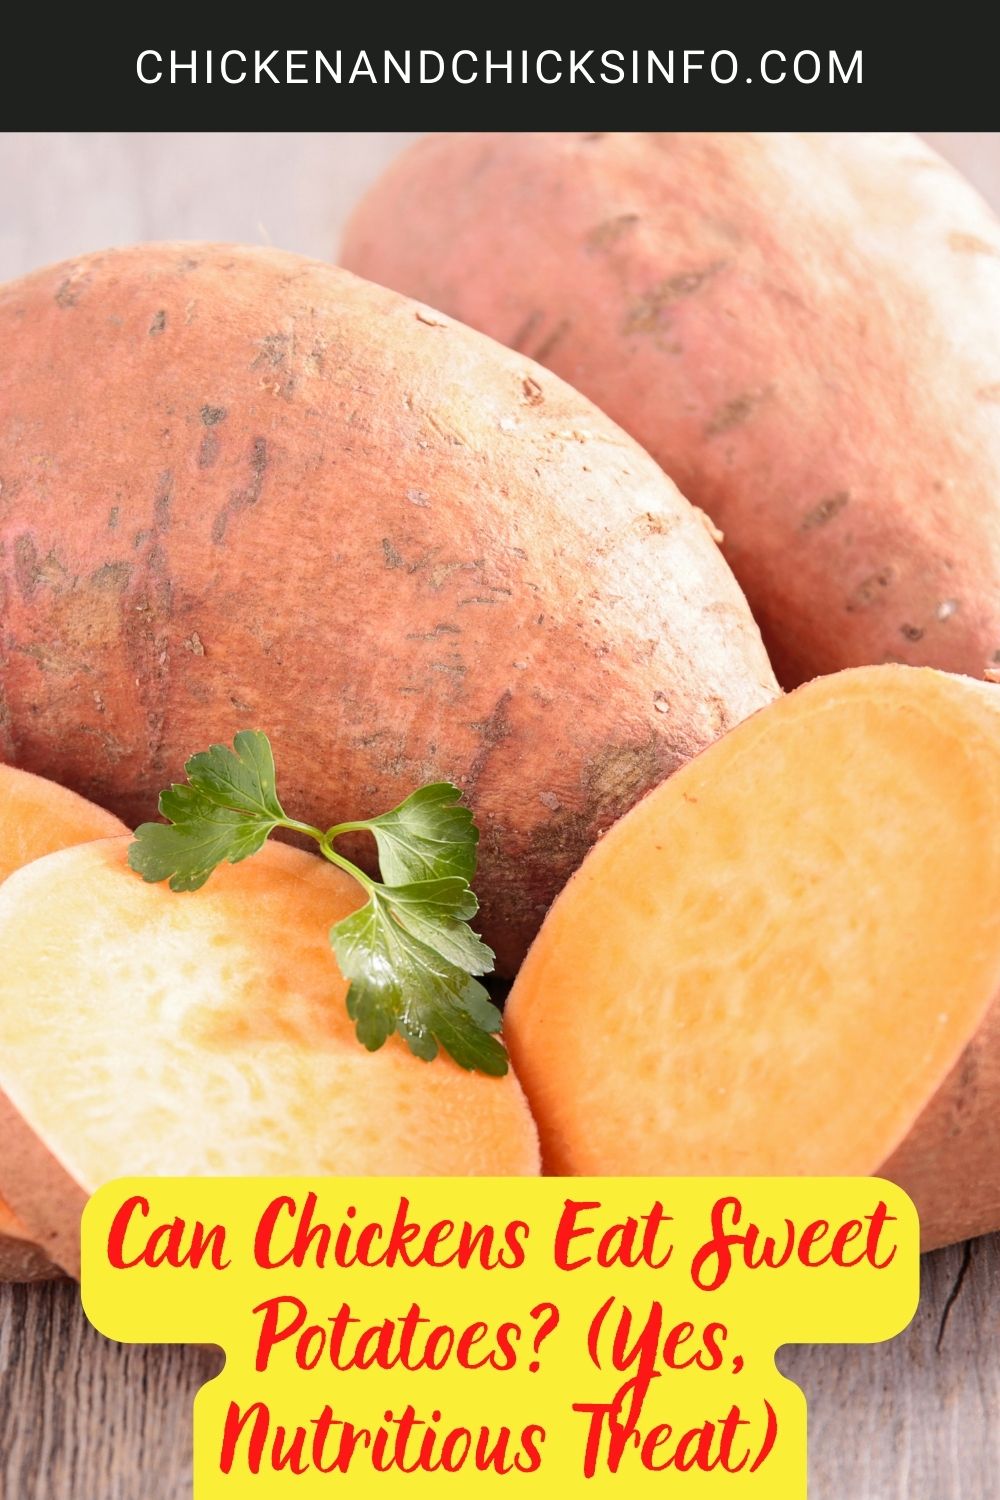 Can Chickens Eat Sweet Potatoes? (Yes, Nutritious Treat) poster.
